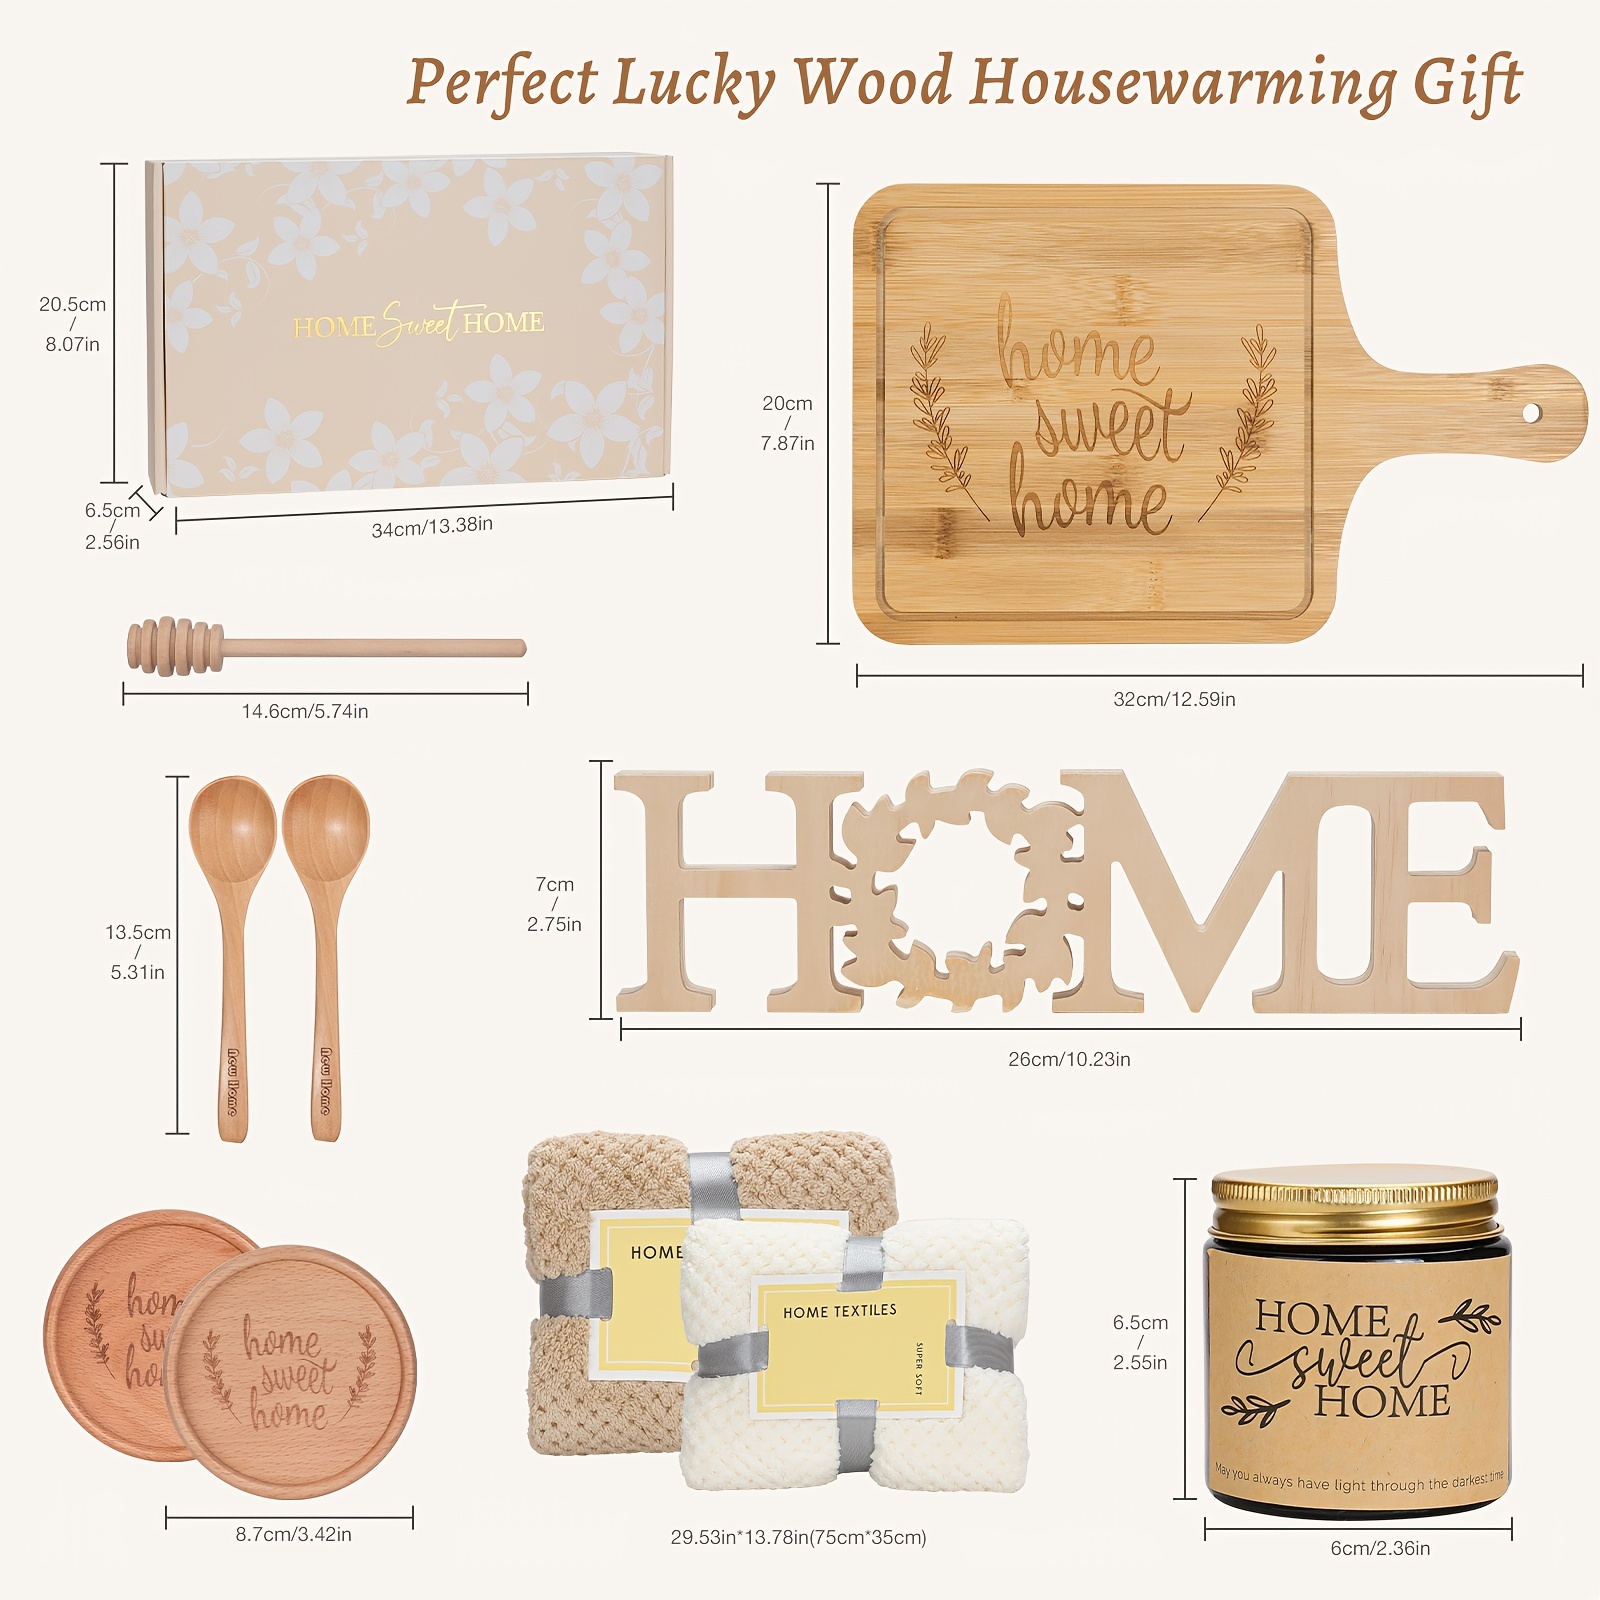 House Warming Gifts New Home - Housewarming Gifts for New House, House  Warming Gifts New Home Women - Housewarming Gift Ideas for Couple - New  Home